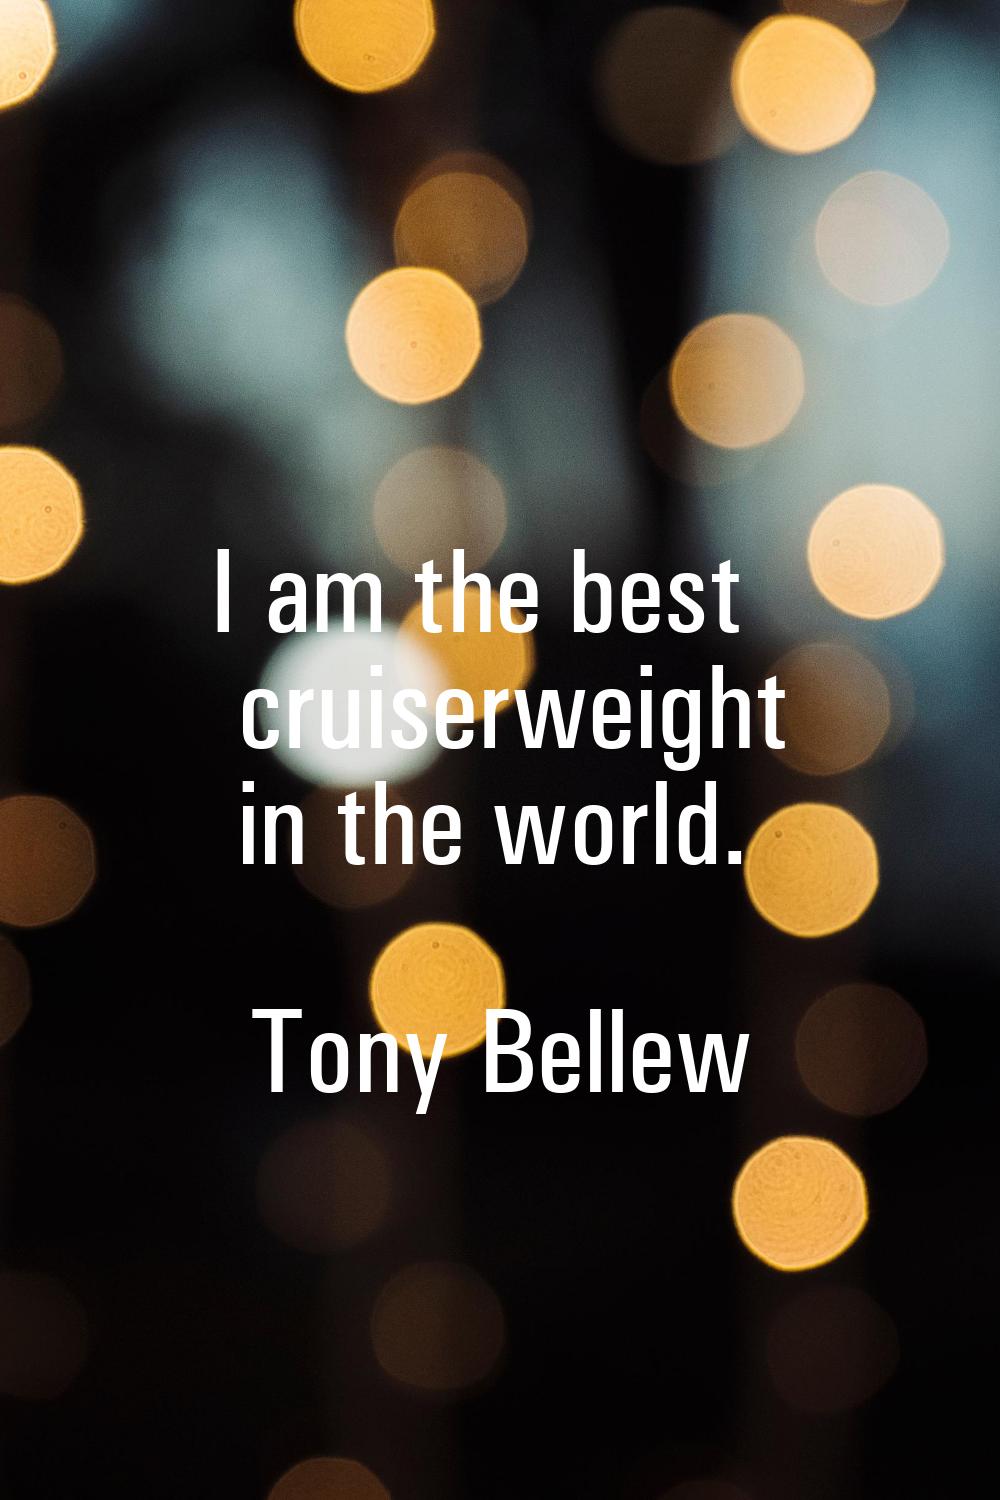 I am the best cruiserweight in the world.